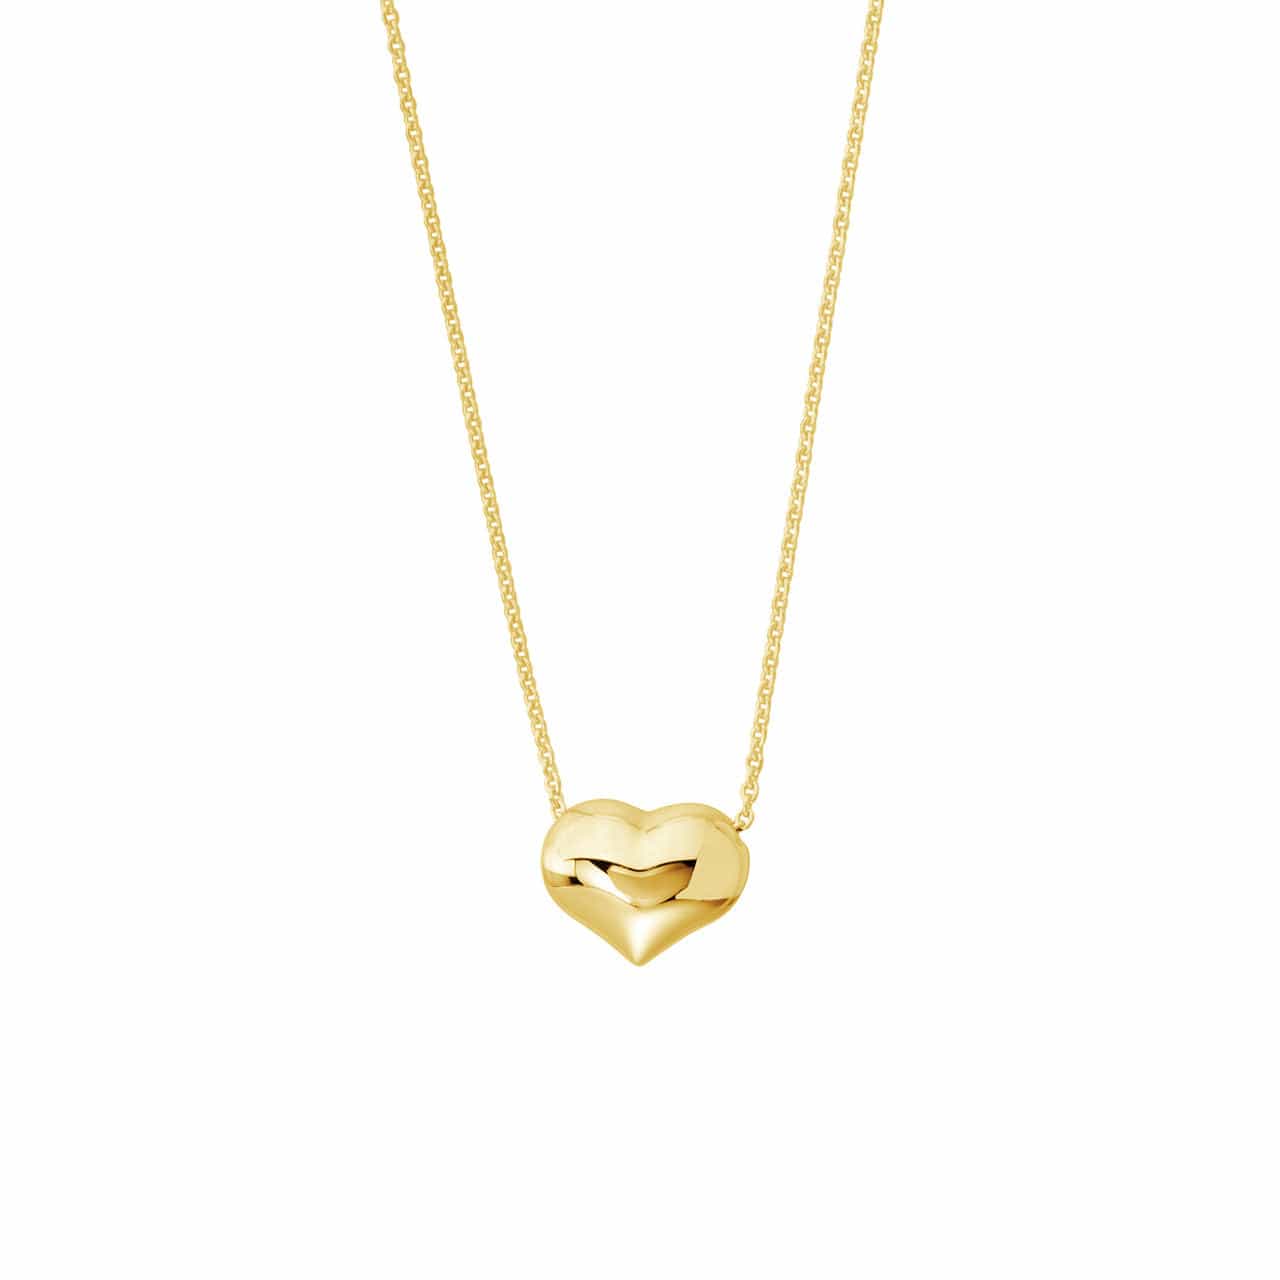 Necklace 14K Puffy Heart Adjustable Necklace